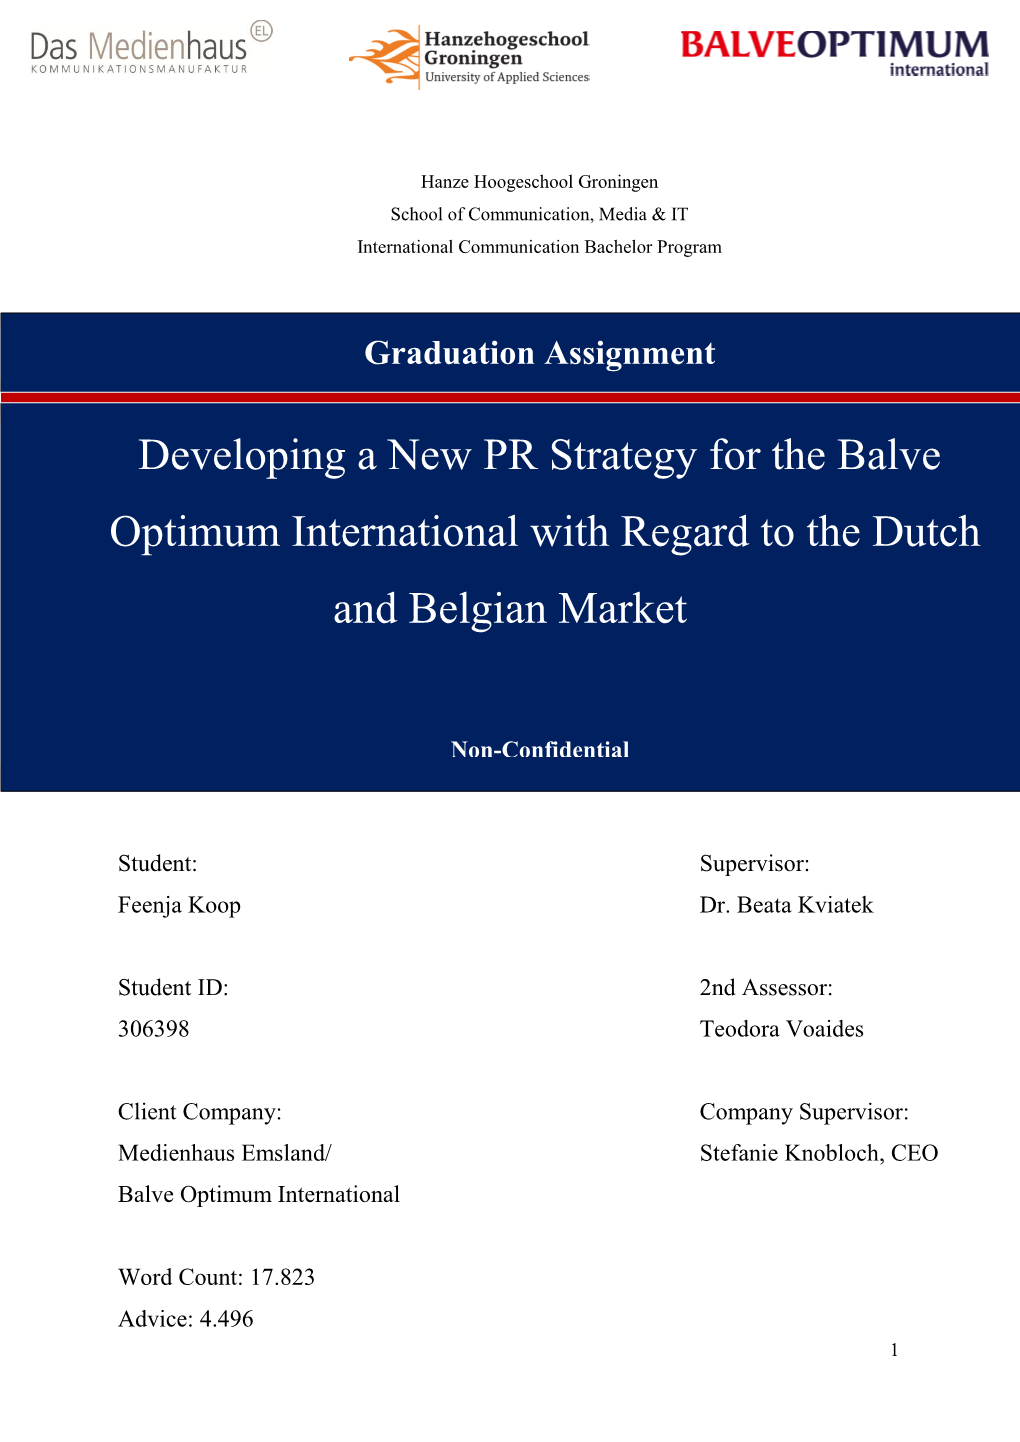 Developing a New PR Strategy for the Balve Optimum International with Regard to the Dutch and Belgian Market